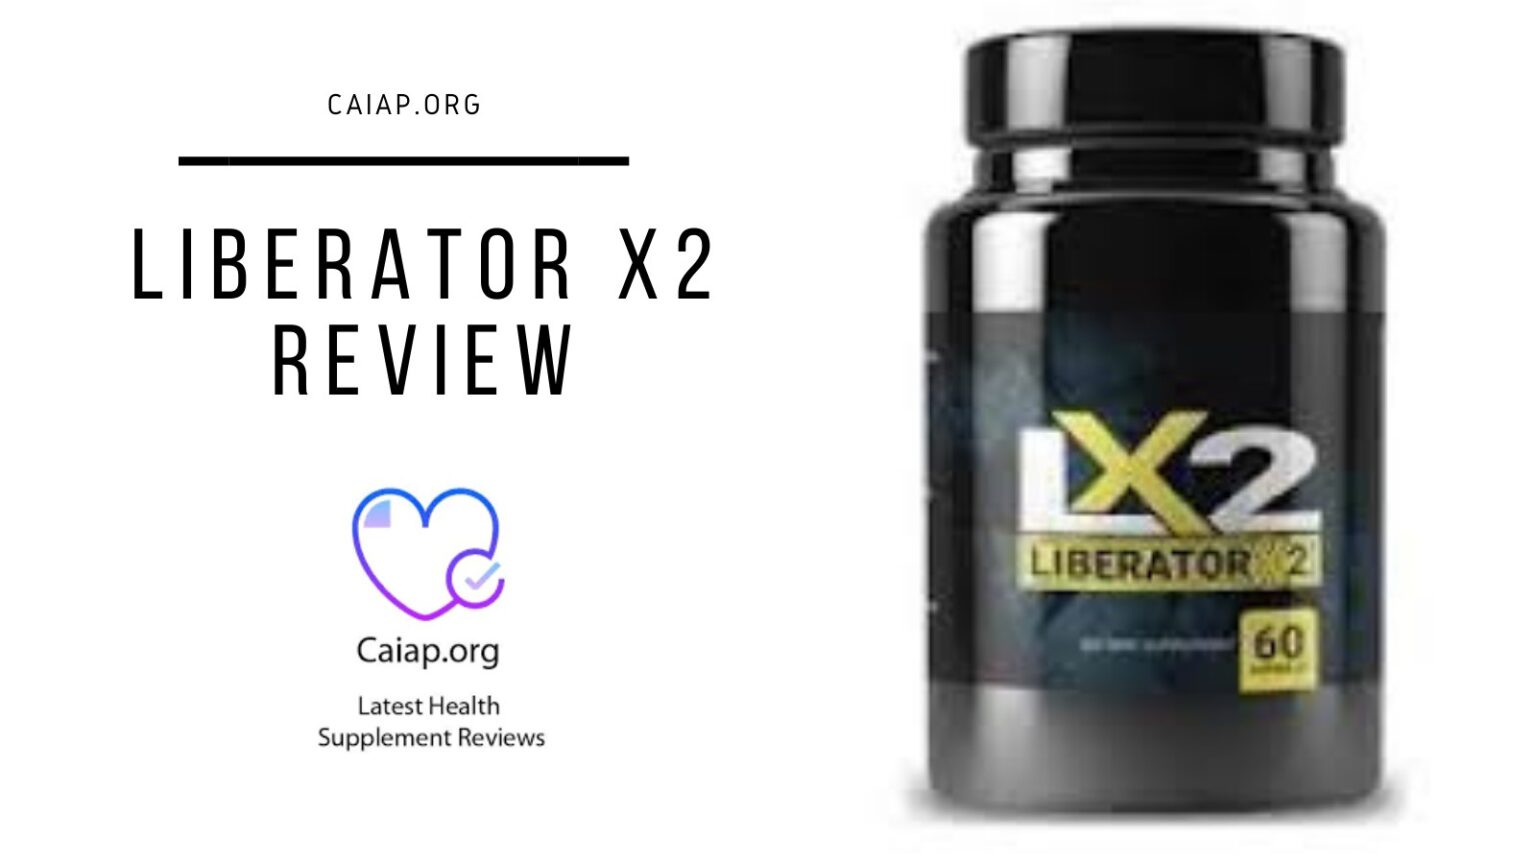 Liberator X2 is a supplement product for men. Find out whether Liberator X2 is the product for you with these reviews.